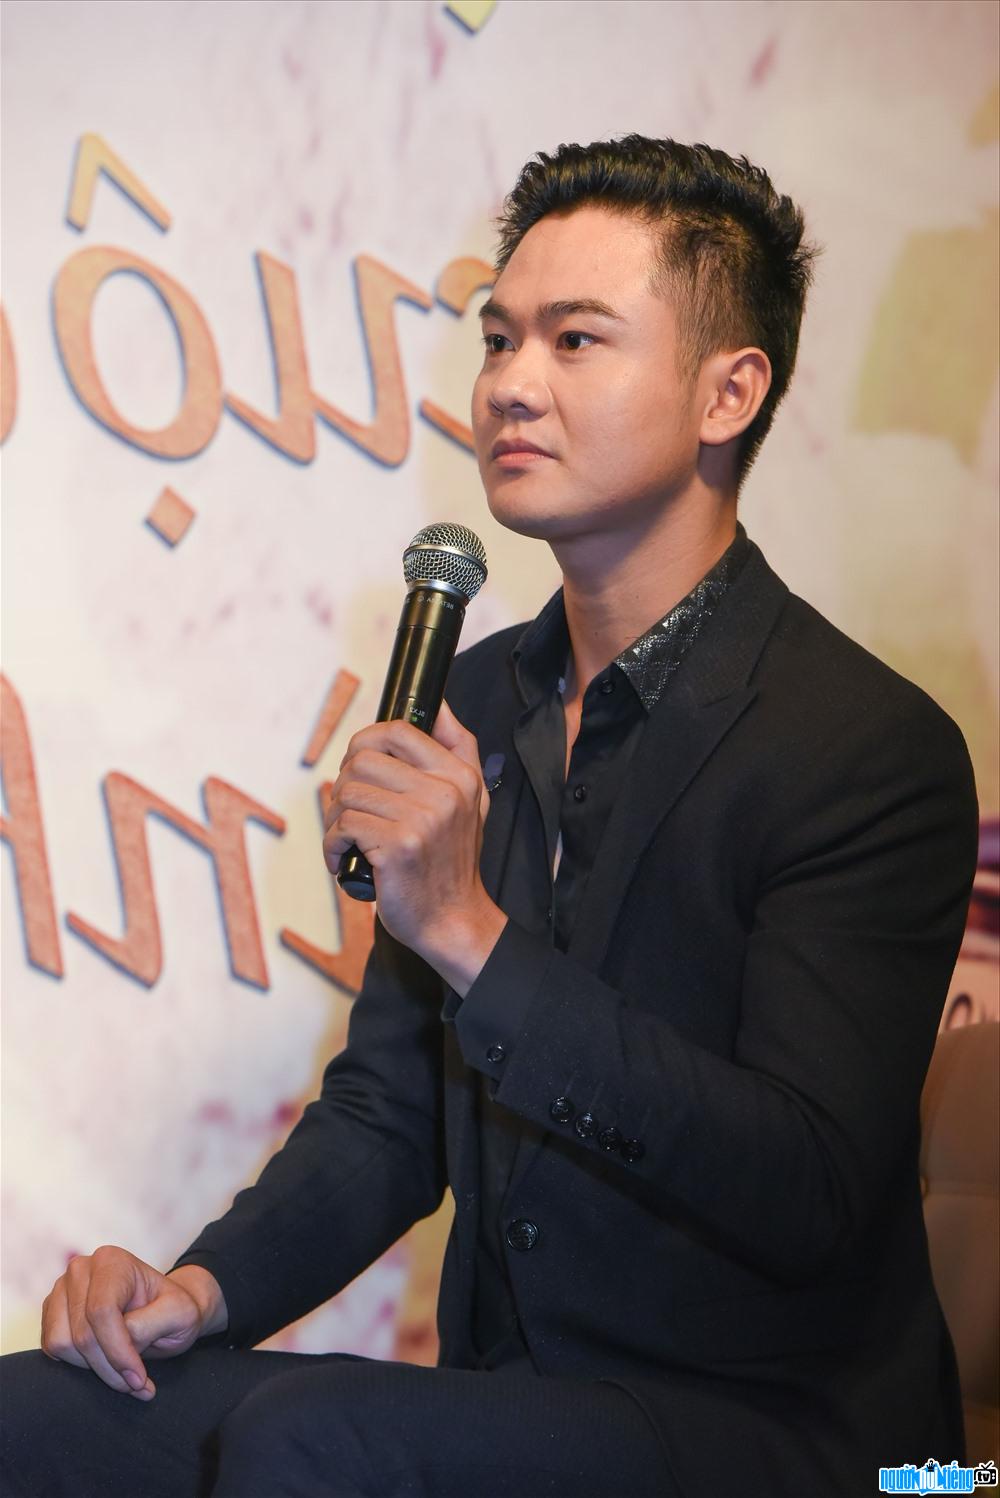  Picture of singer Thanh Cuong - the "marshal" guy of "Hanoi 2018 beautiful voice"